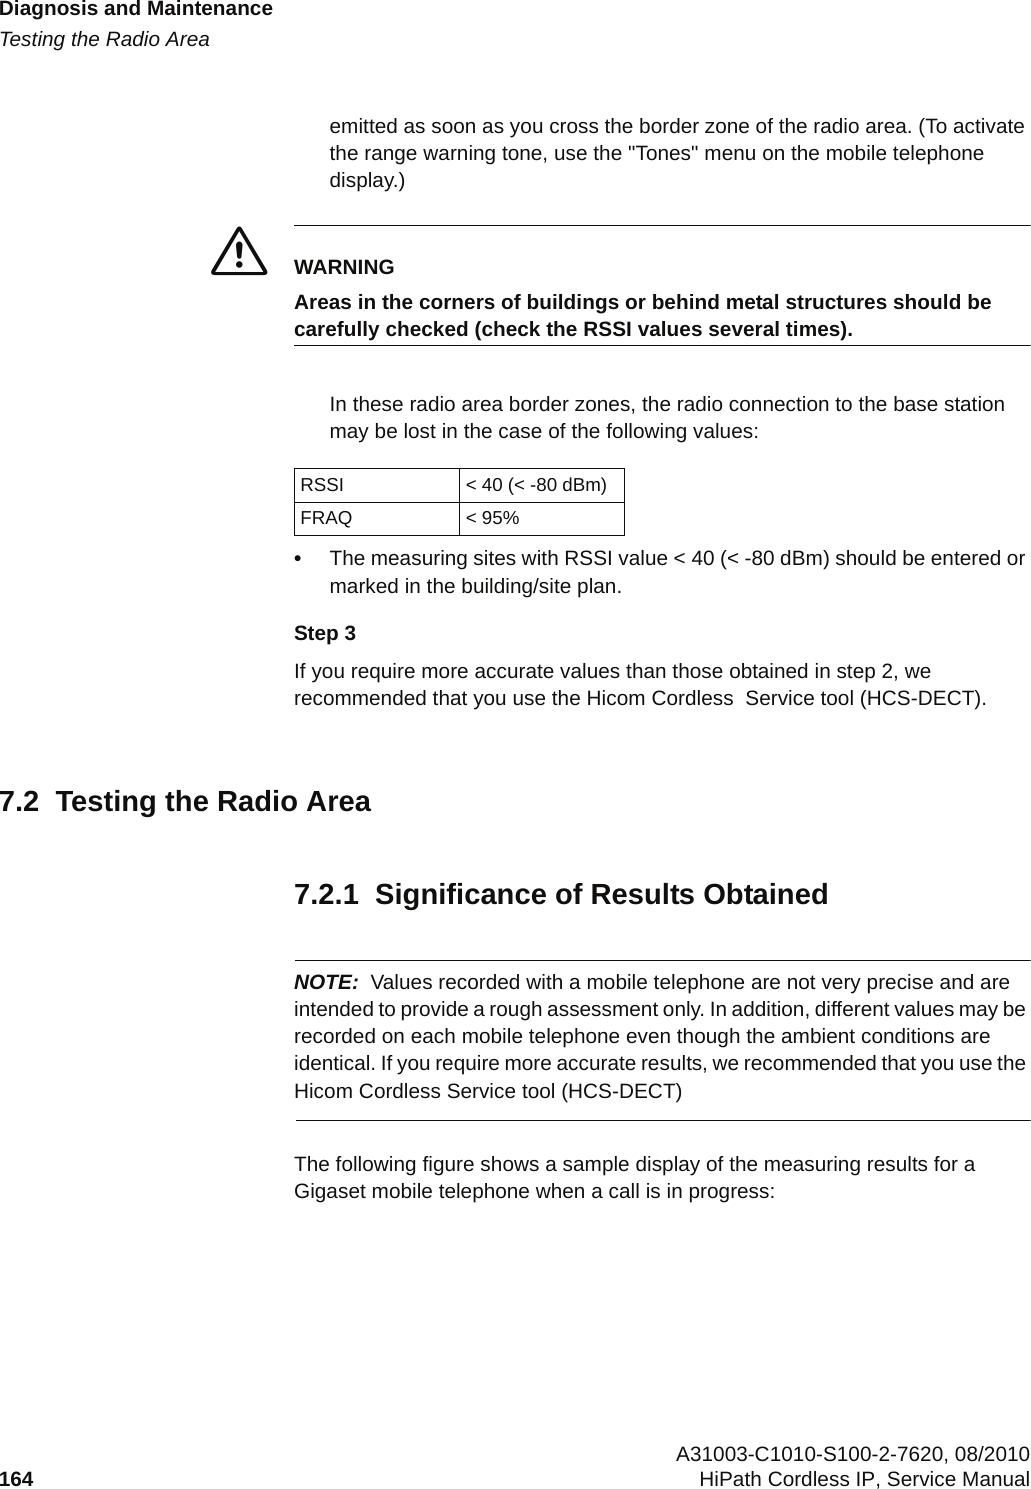 Diagnosis and Maintenancec07.fmTesting the Radio Area A31003-C1010-S100-2-7620, 08/2010164 HiPath Cordless IP, Service Manual          emitted as soon as you cross the border zone of the radio area. (To activate the range warning tone, use the &quot;Tones&quot; menu on the mobile telephone display.)7WARNINGAreas in the corners of buildings or behind metal structures should be carefully checked (check the RSSI values several times).In these radio area border zones, the radio connection to the base station may be lost in the case of the following values:•The measuring sites with RSSI value &lt; 40 (&lt; -80 dBm) should be entered or marked in the building/site plan.Step 3If you require more accurate values than those obtained in step 2, we recommended that you use the Hicom Cordless  Service tool (HCS-DECT).7.2  Testing the Radio Area7.2.1  Significance of Results ObtainedNOTE: Values recorded with a mobile telephone are not very precise and are intended to provide a rough assessment only. In addition, different values may be recorded on each mobile telephone even though the ambient conditions are identical. If you require more accurate results, we recommended that you use the Hicom Cordless Service tool (HCS-DECT)The following figure shows a sample display of the measuring results for a Gigaset mobile telephone when a call is in progress:RSSI &lt; 40 (&lt; -80 dBm)FRAQ &lt; 95%